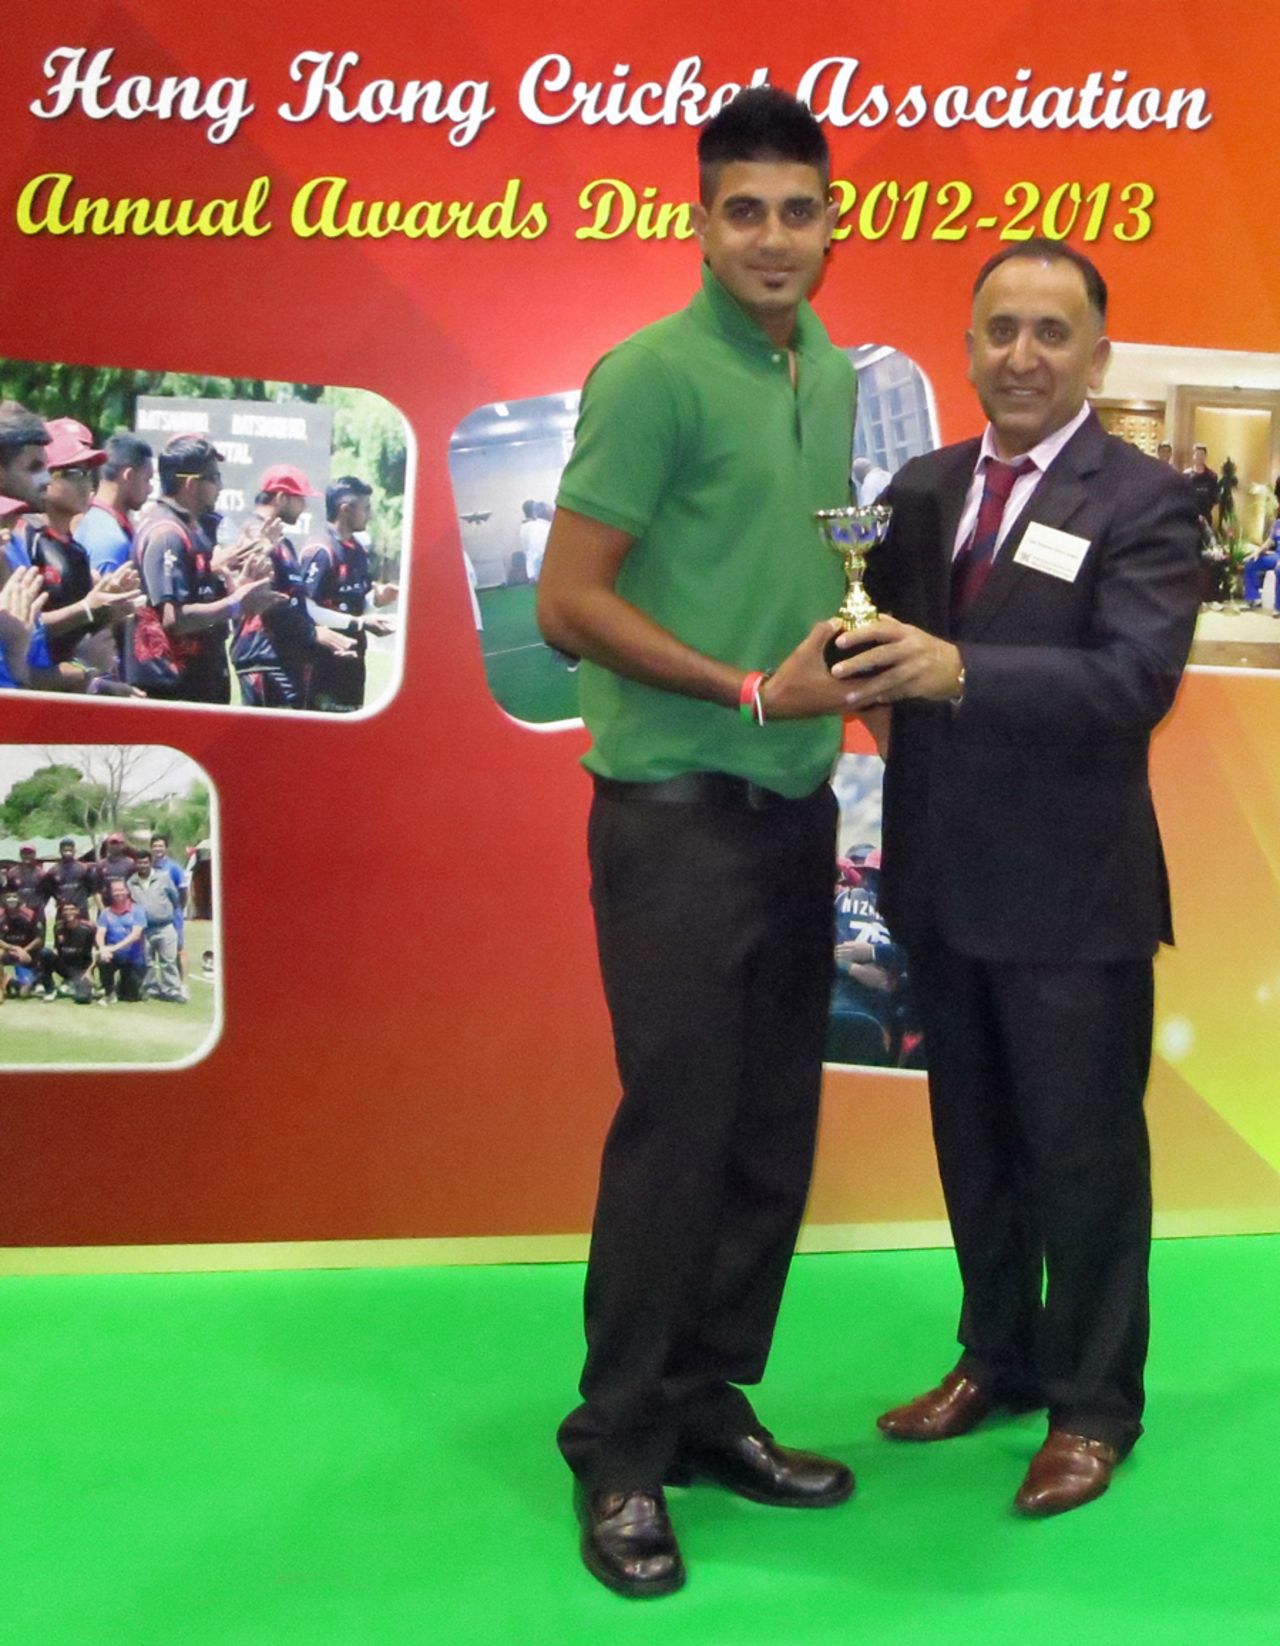 Waqas Barkat receives his Hong Kong Cricketer of the Year trophy from outgoing HKCA President Capt. Saleem Ahmed Shahzada during the HKCA 2012-13 Annual Awards dinner at Kowloon Cricket Club on 5th June 2013